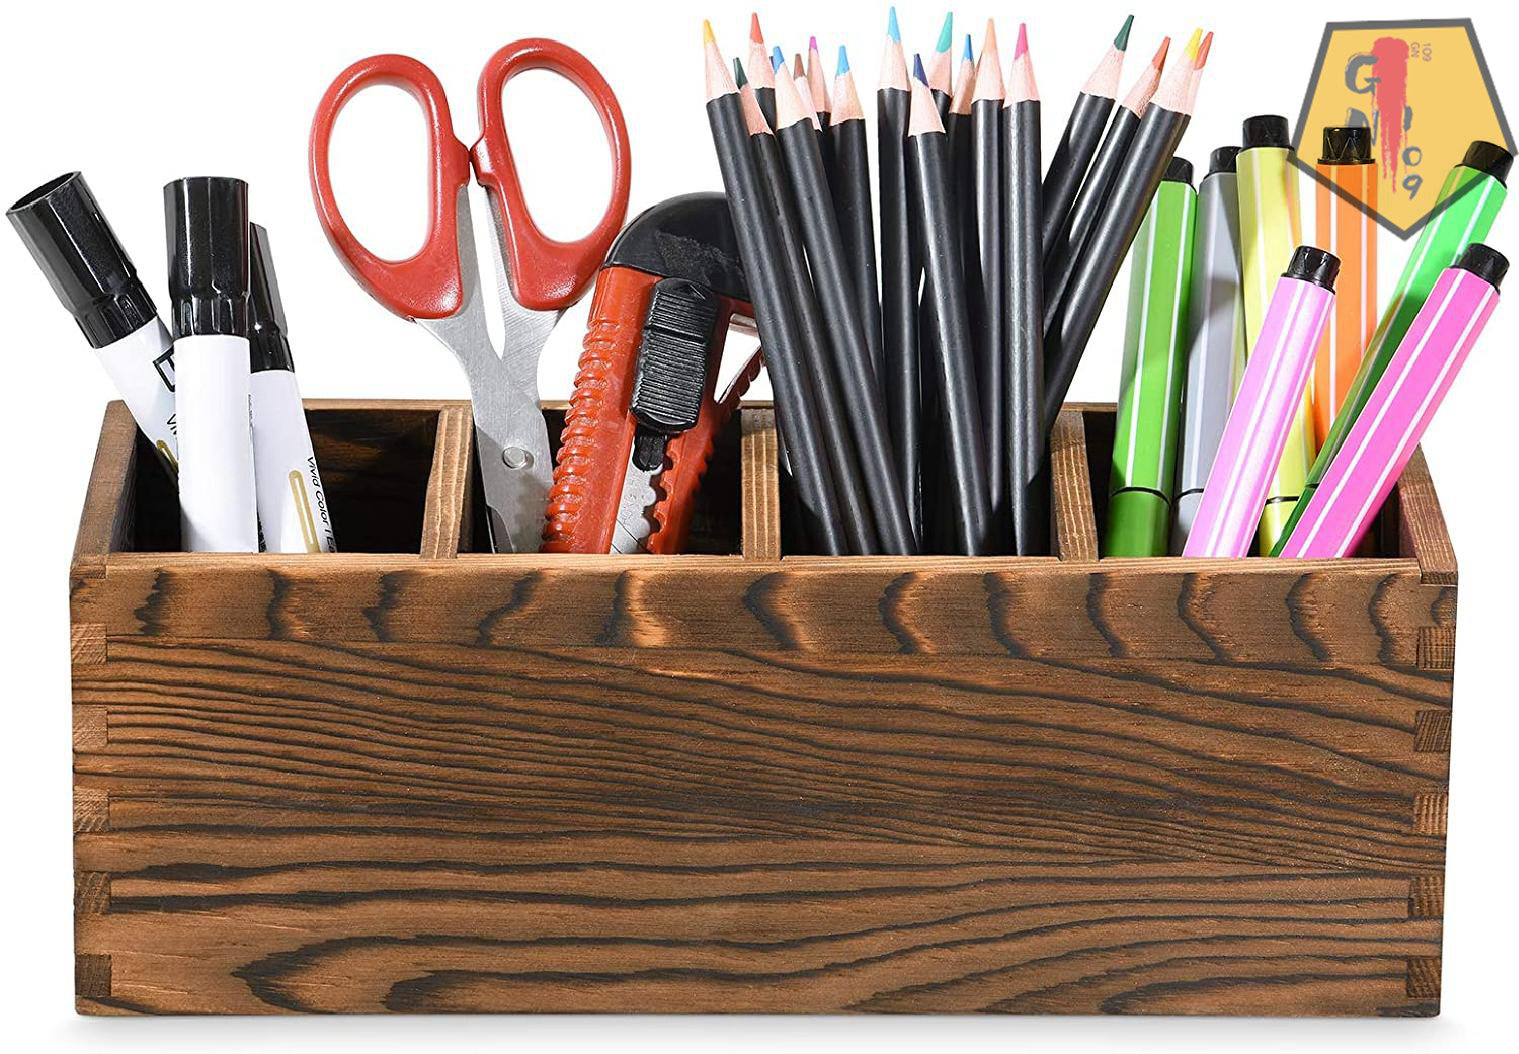 Organize Your Desk With This DIY Wooden Pen Organizer - Multi-Functional  Pen Holder For Office, School & Home!